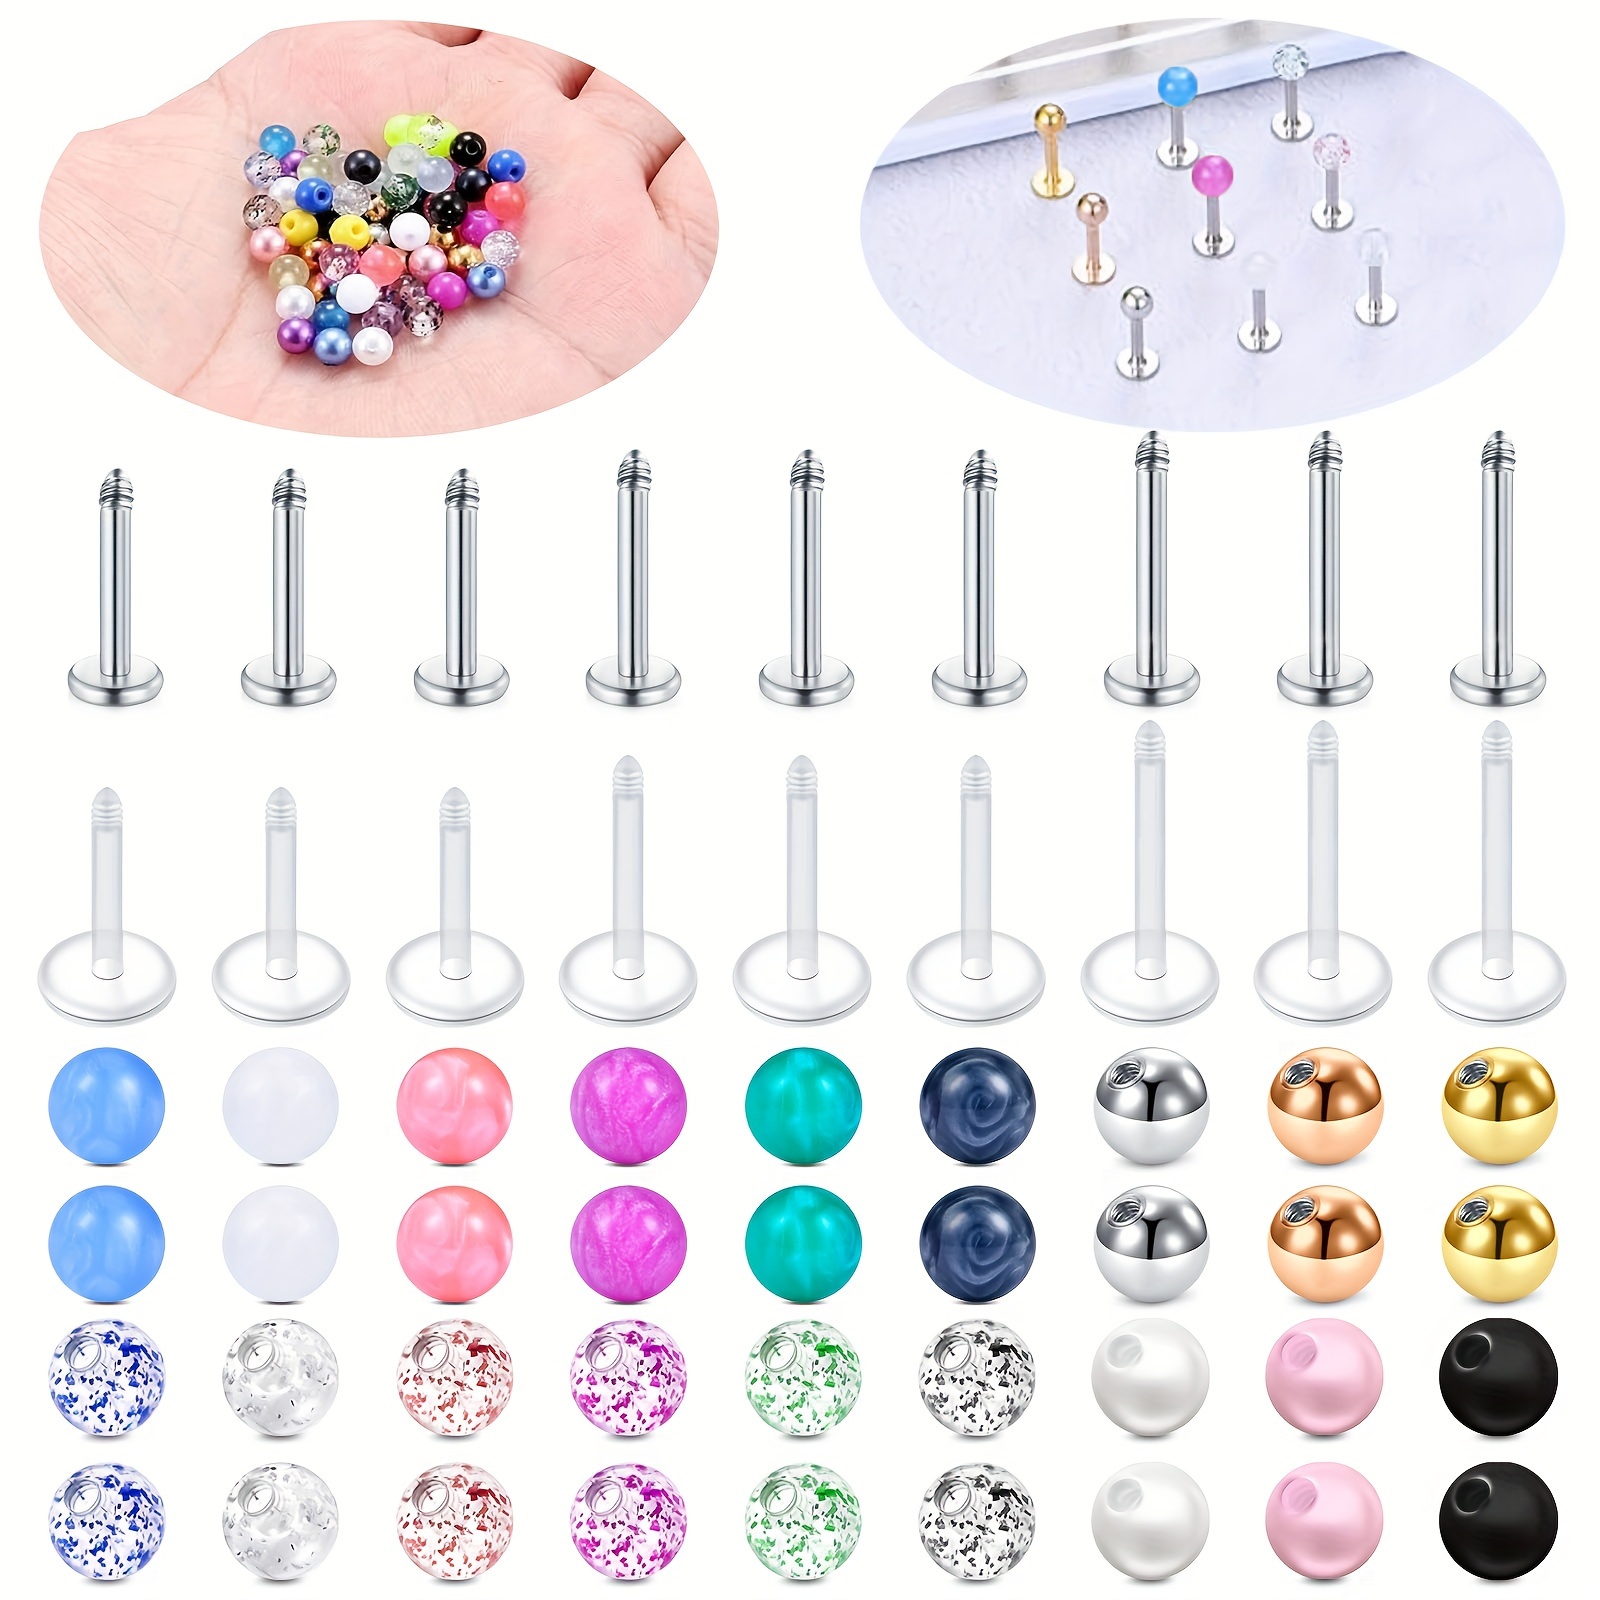 Plastic Earrings For Surgery Medical Clear Post Stud - 40 Pieces